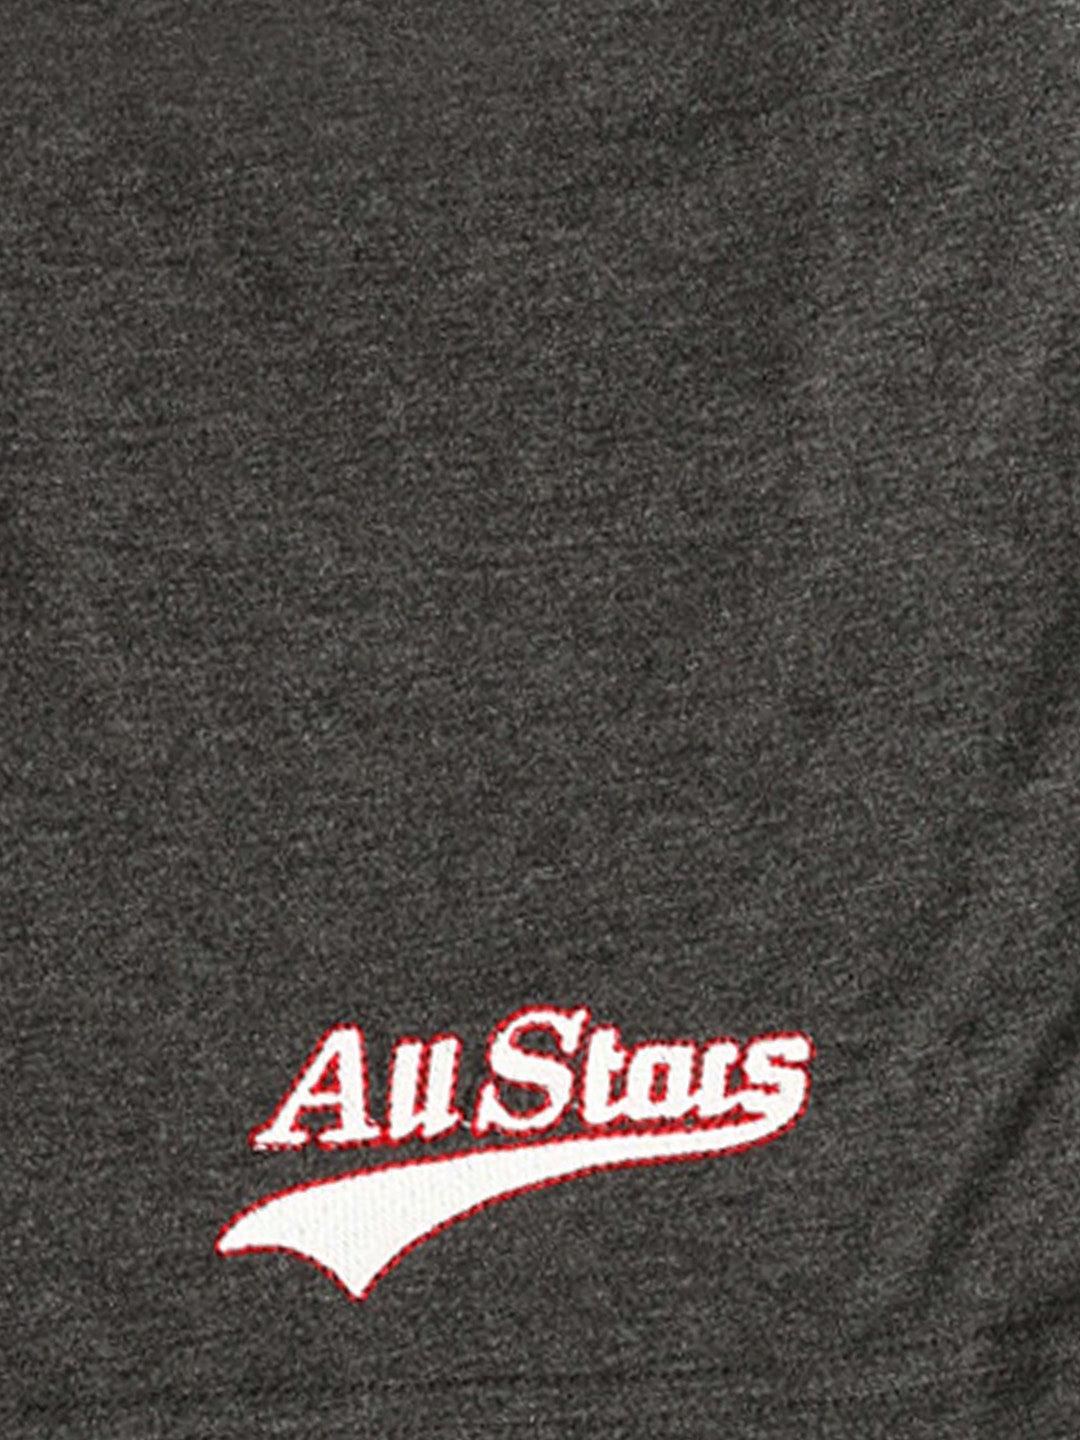 All Stars Charcoal Shorts - Juscubs